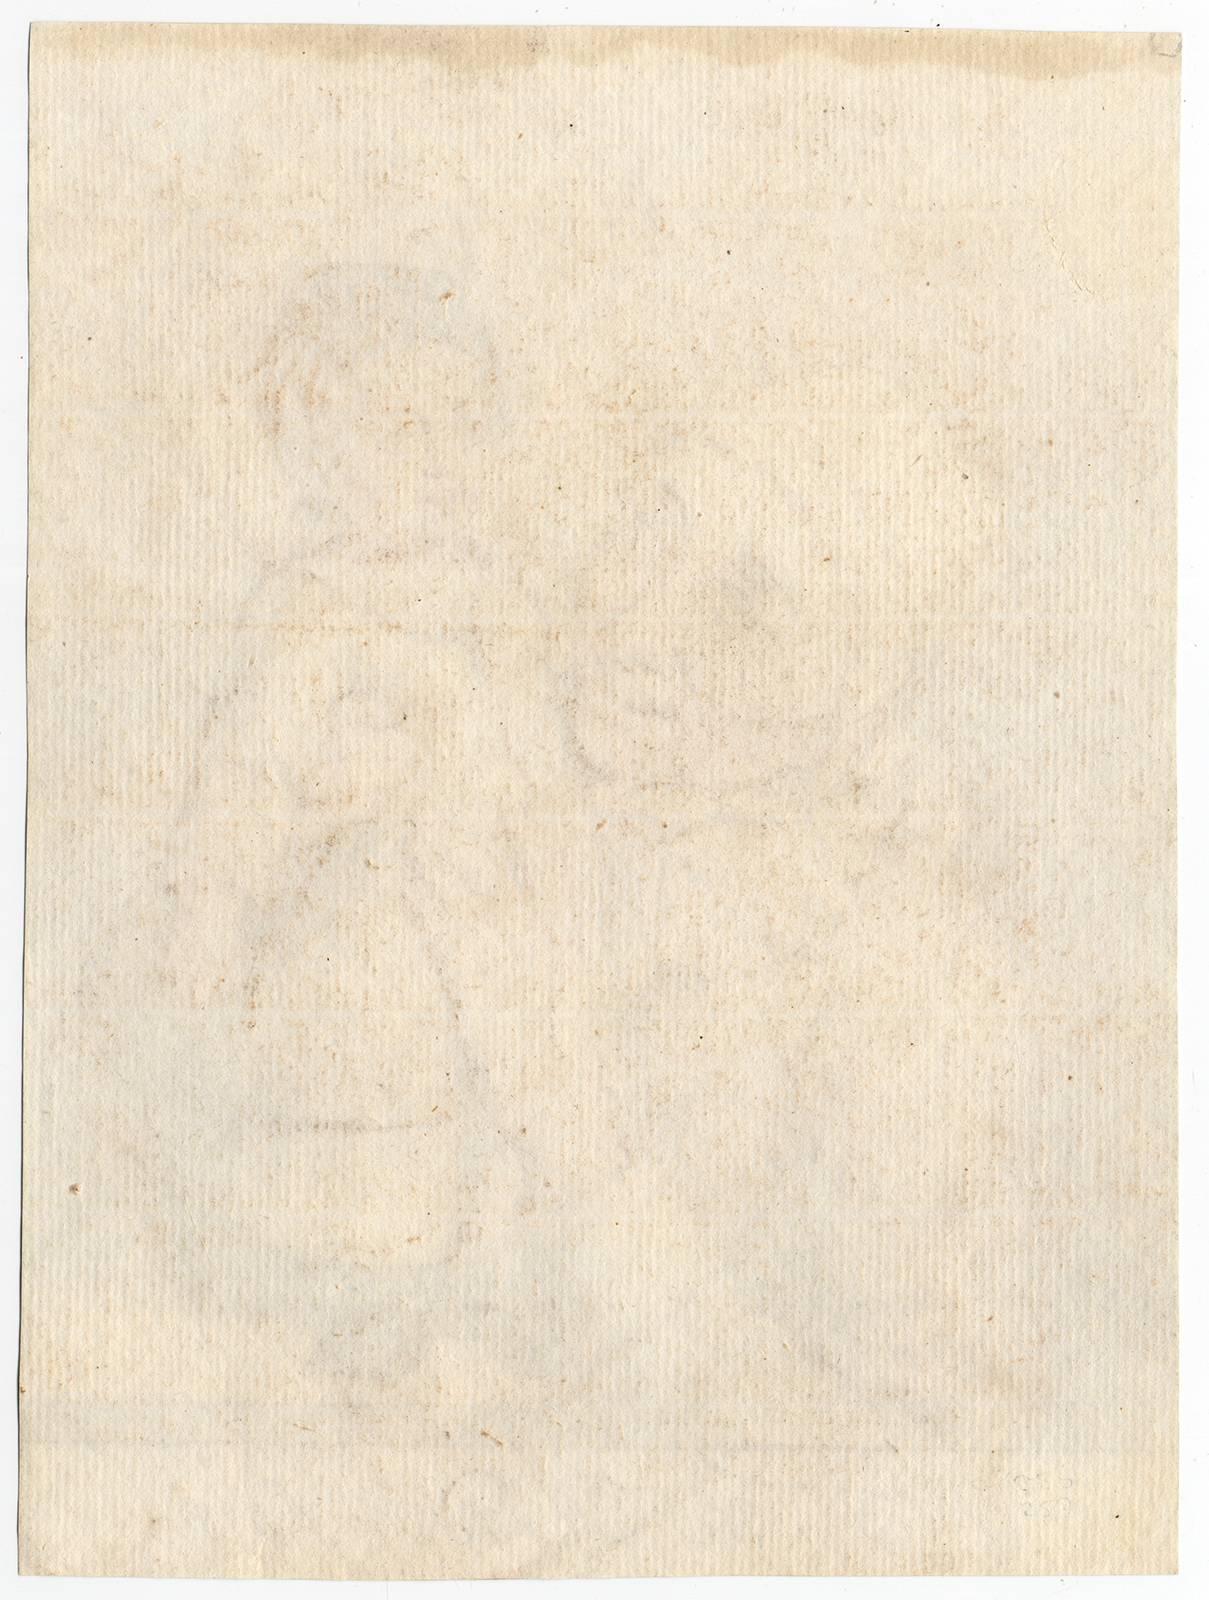 Untitled - Grandmother smiling at a (grand)child. – Art von Theodorus de Roode